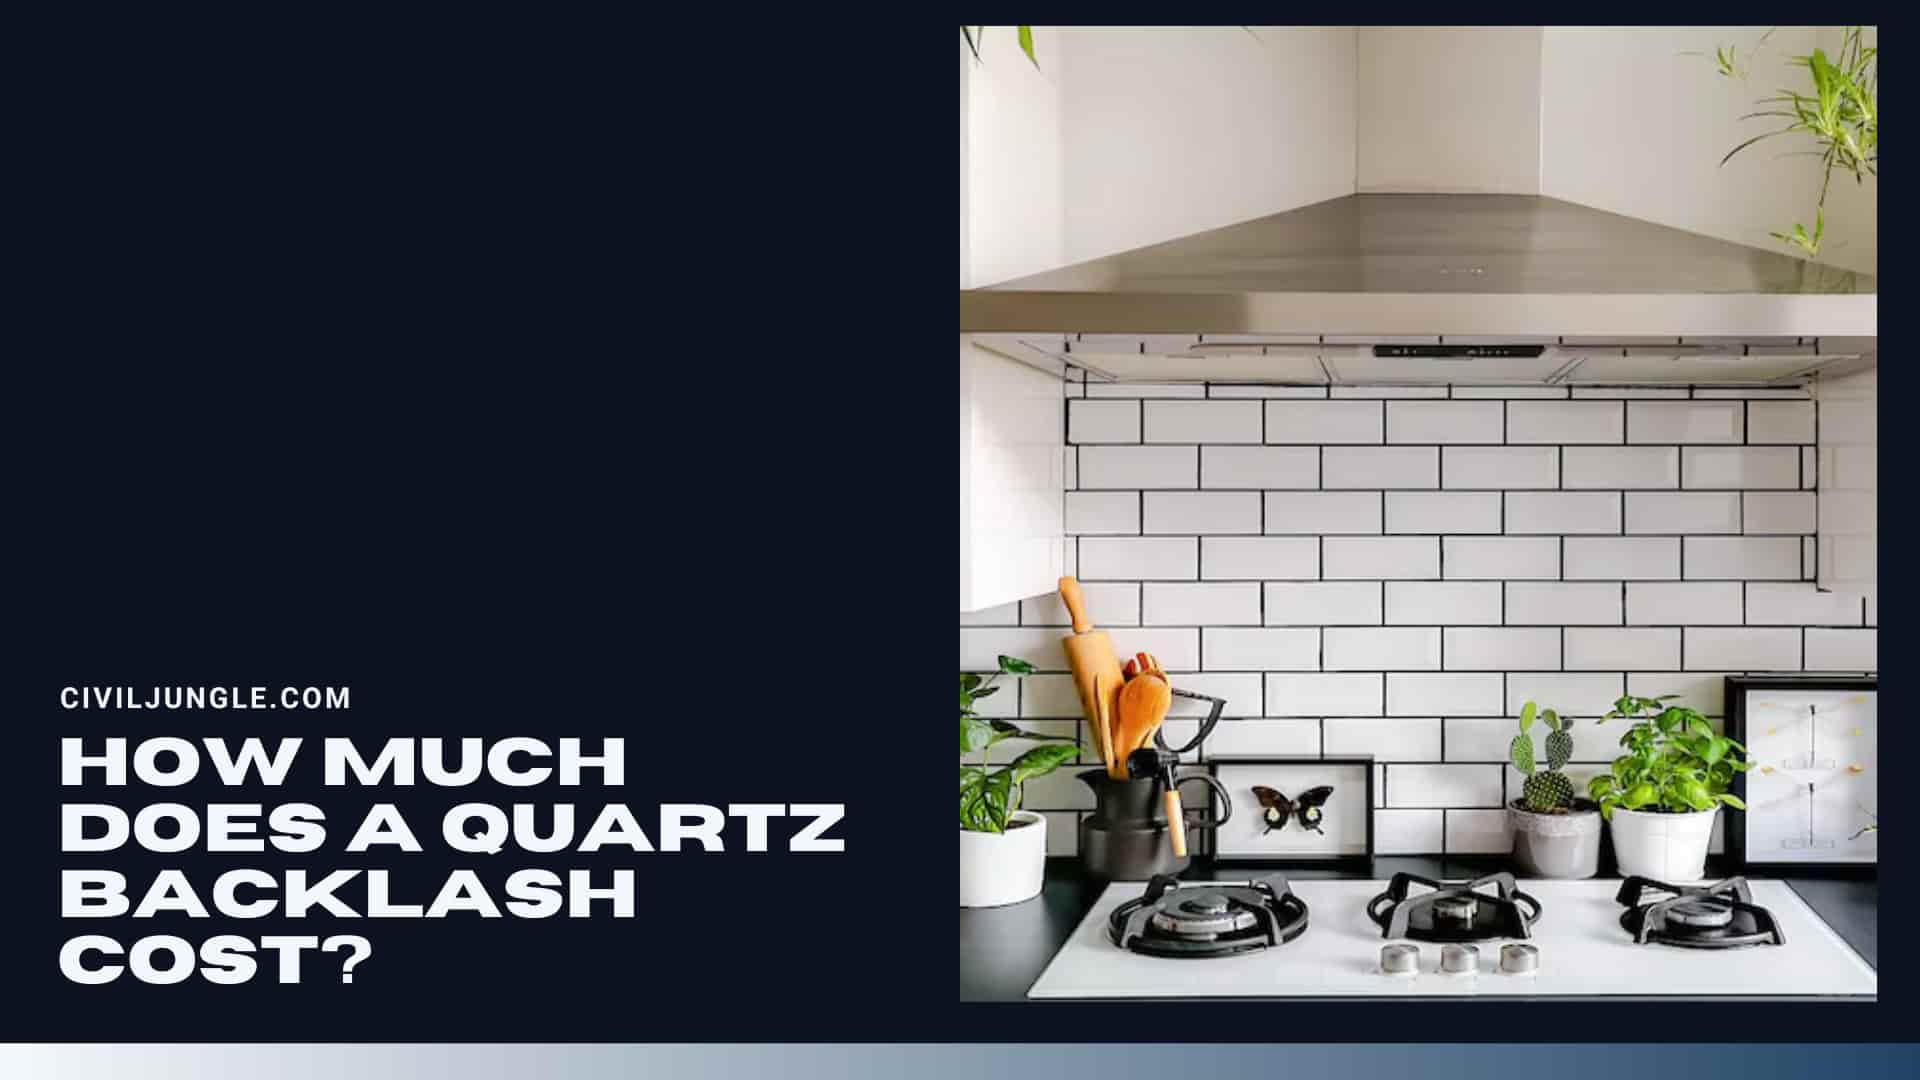 How Much Does a Quartz Backlash Cost?